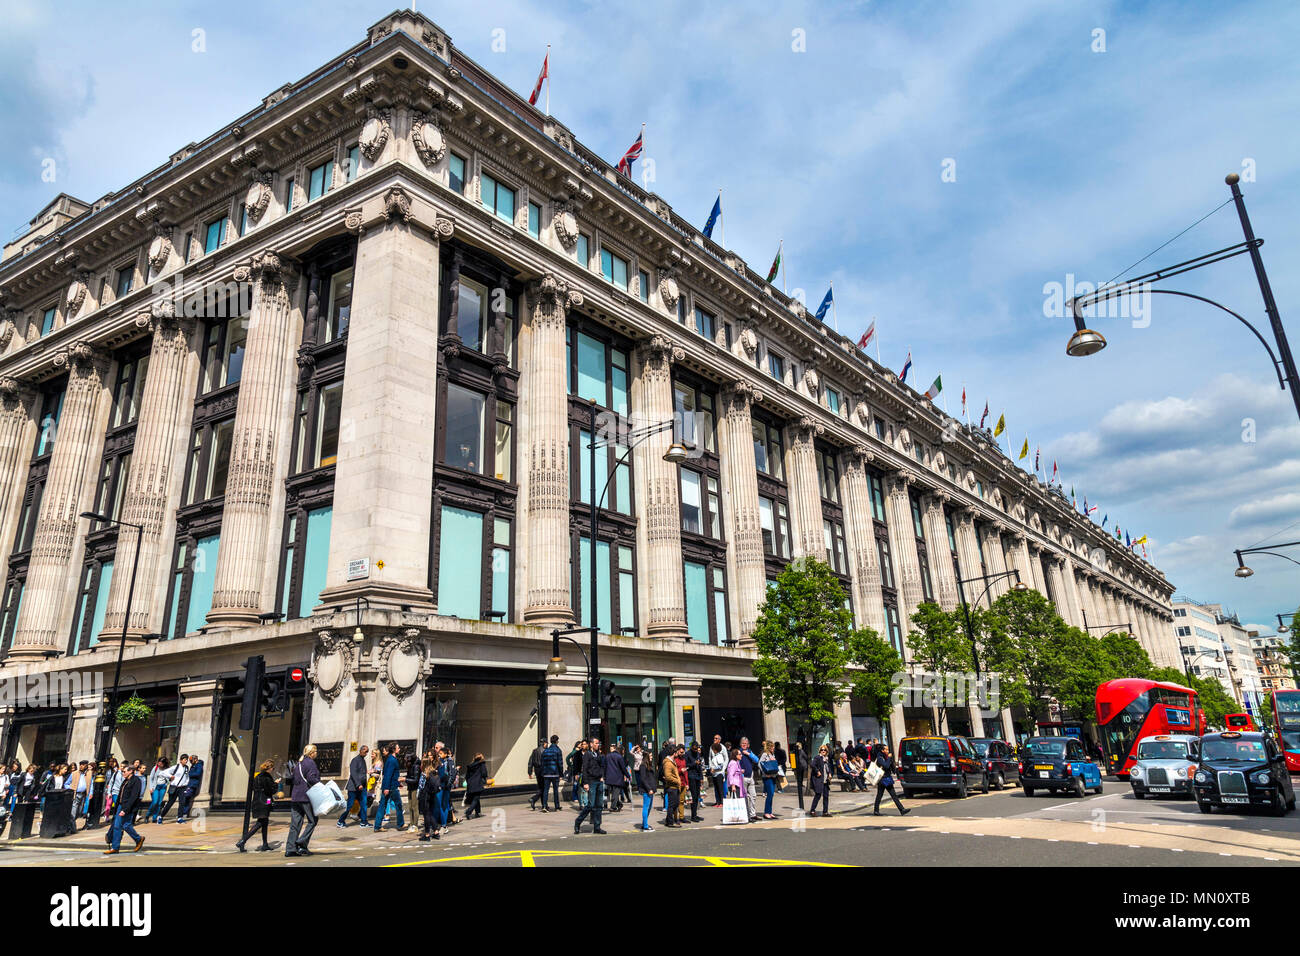 Selfridges department store in busy Oxford Street shopping area, London, UK Stock Photo